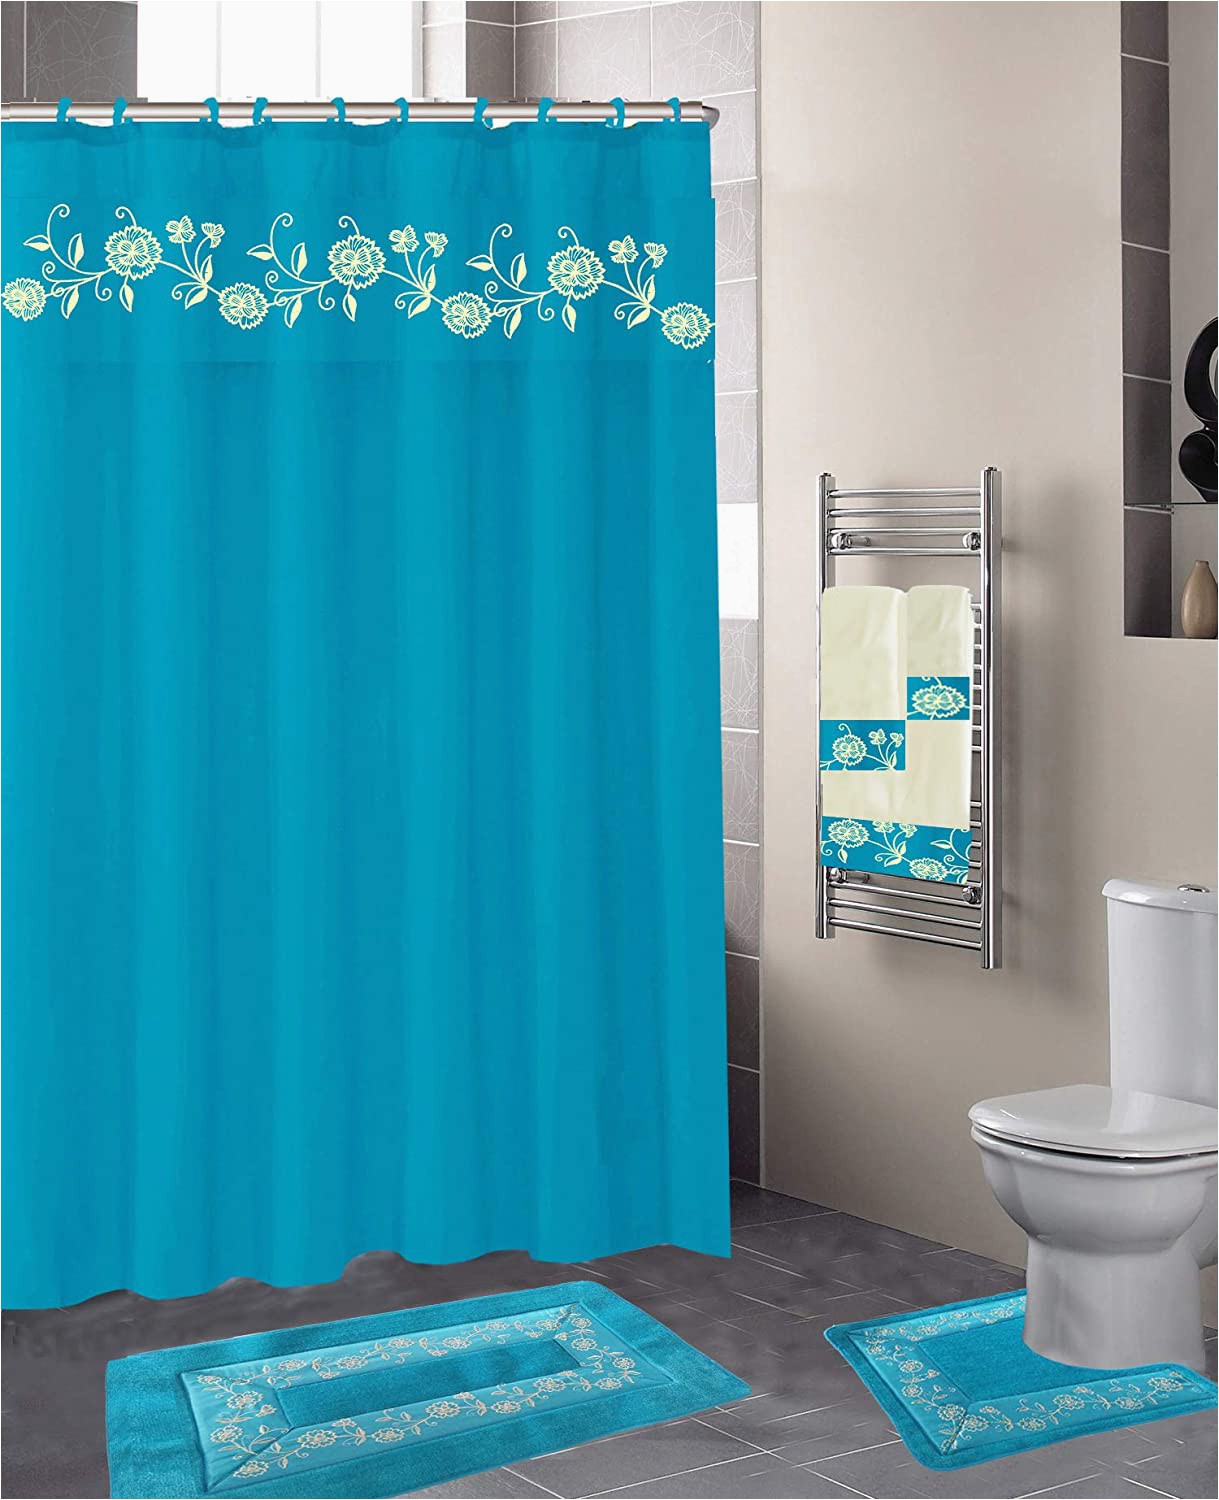 Turquoise Bathroom Rugs and towels Luxury Home Collection 18 Pc Bath Rug Set Embroidery Non Slip Bathroom Rug Mats and Rug Contour and Shower Curtain and towels and Rings Hooks and